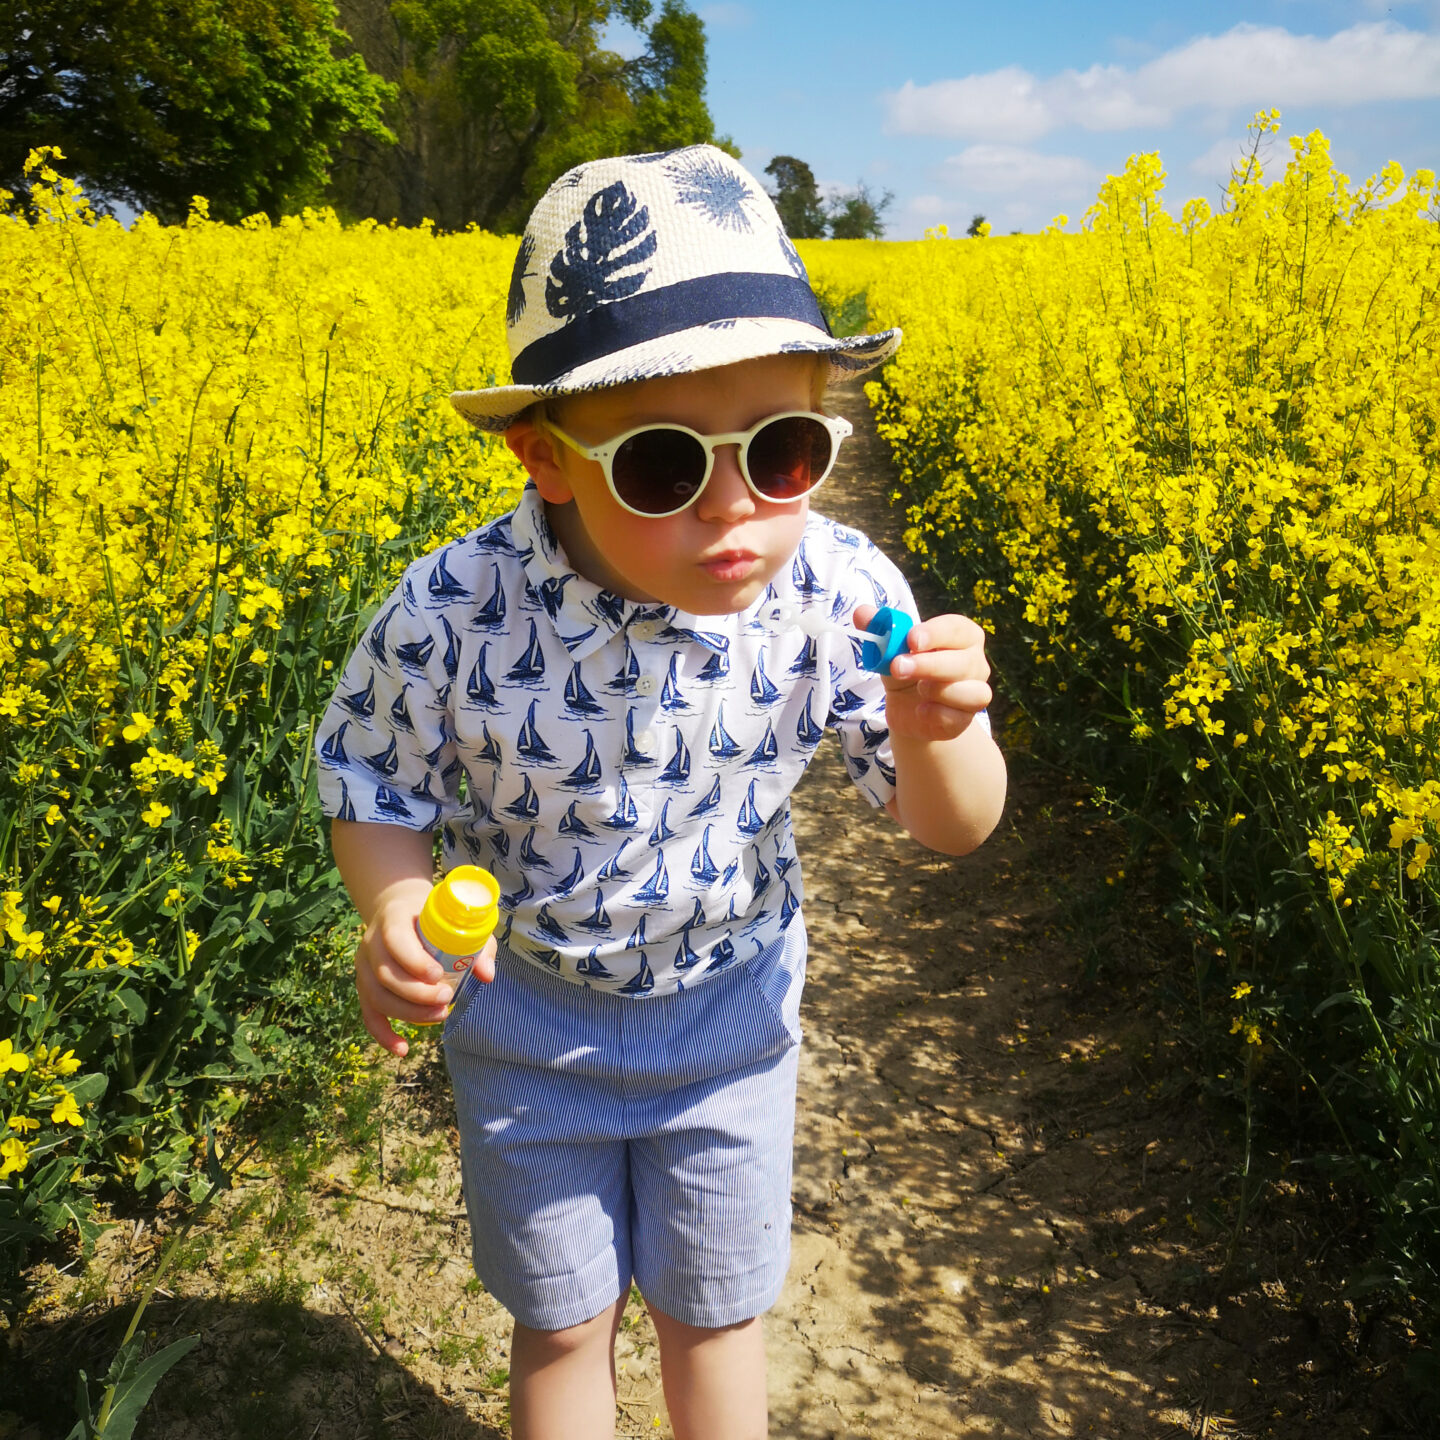 Rachel Riley SS22, SS22 Collection, Baba Fashionista, Luxury Childrenswear, British Designer, Rachel Riley Clothing, Vintage Vibes, Kidswear, The Frenchie Mummy, Blog Anniversary Giveaway, Win